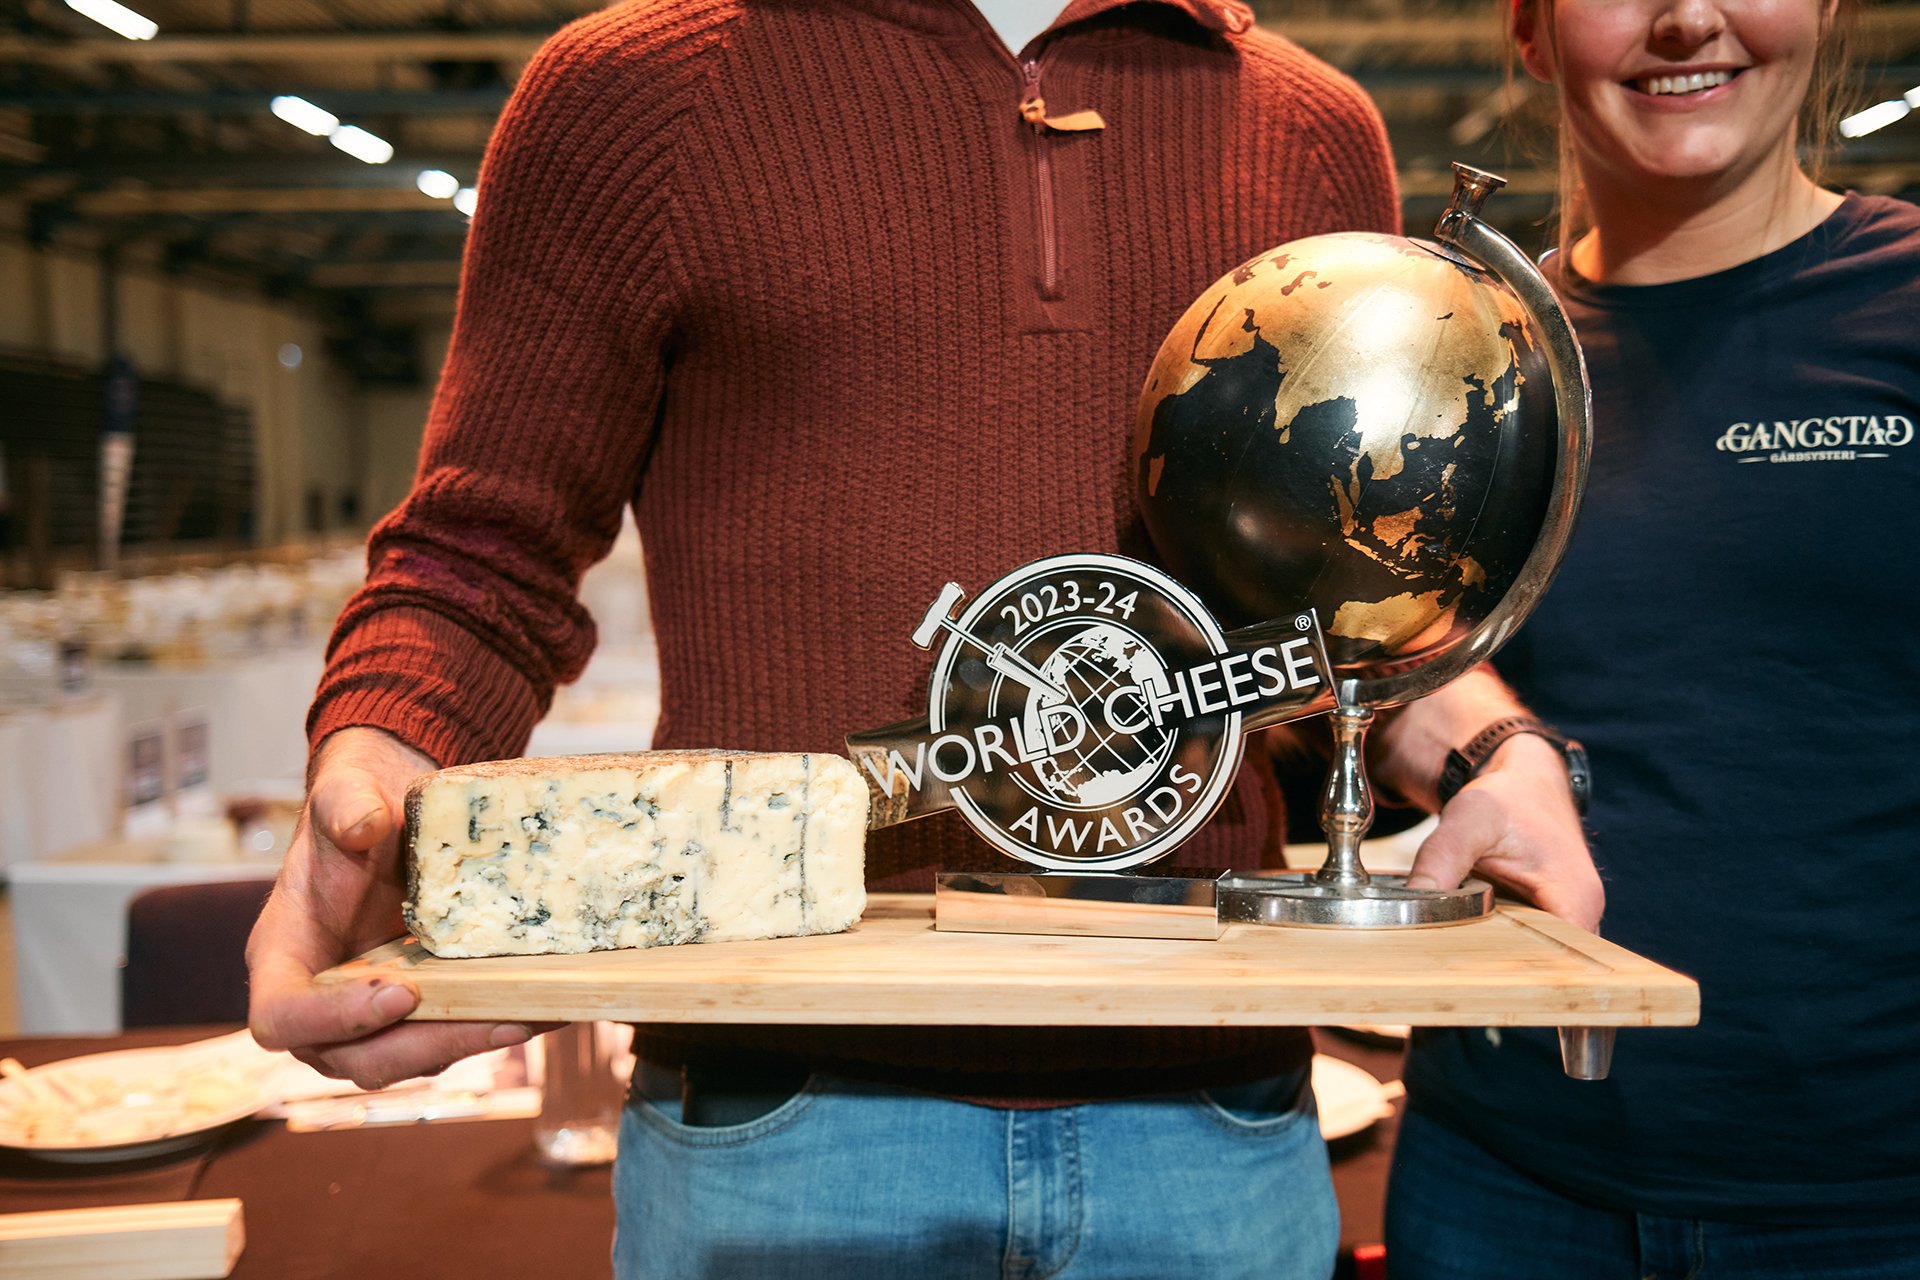 Ole and Maren Gangstad, the owners of Gangstad Gårdsysteri holding the World Champion Cheese, Nidelven Blå